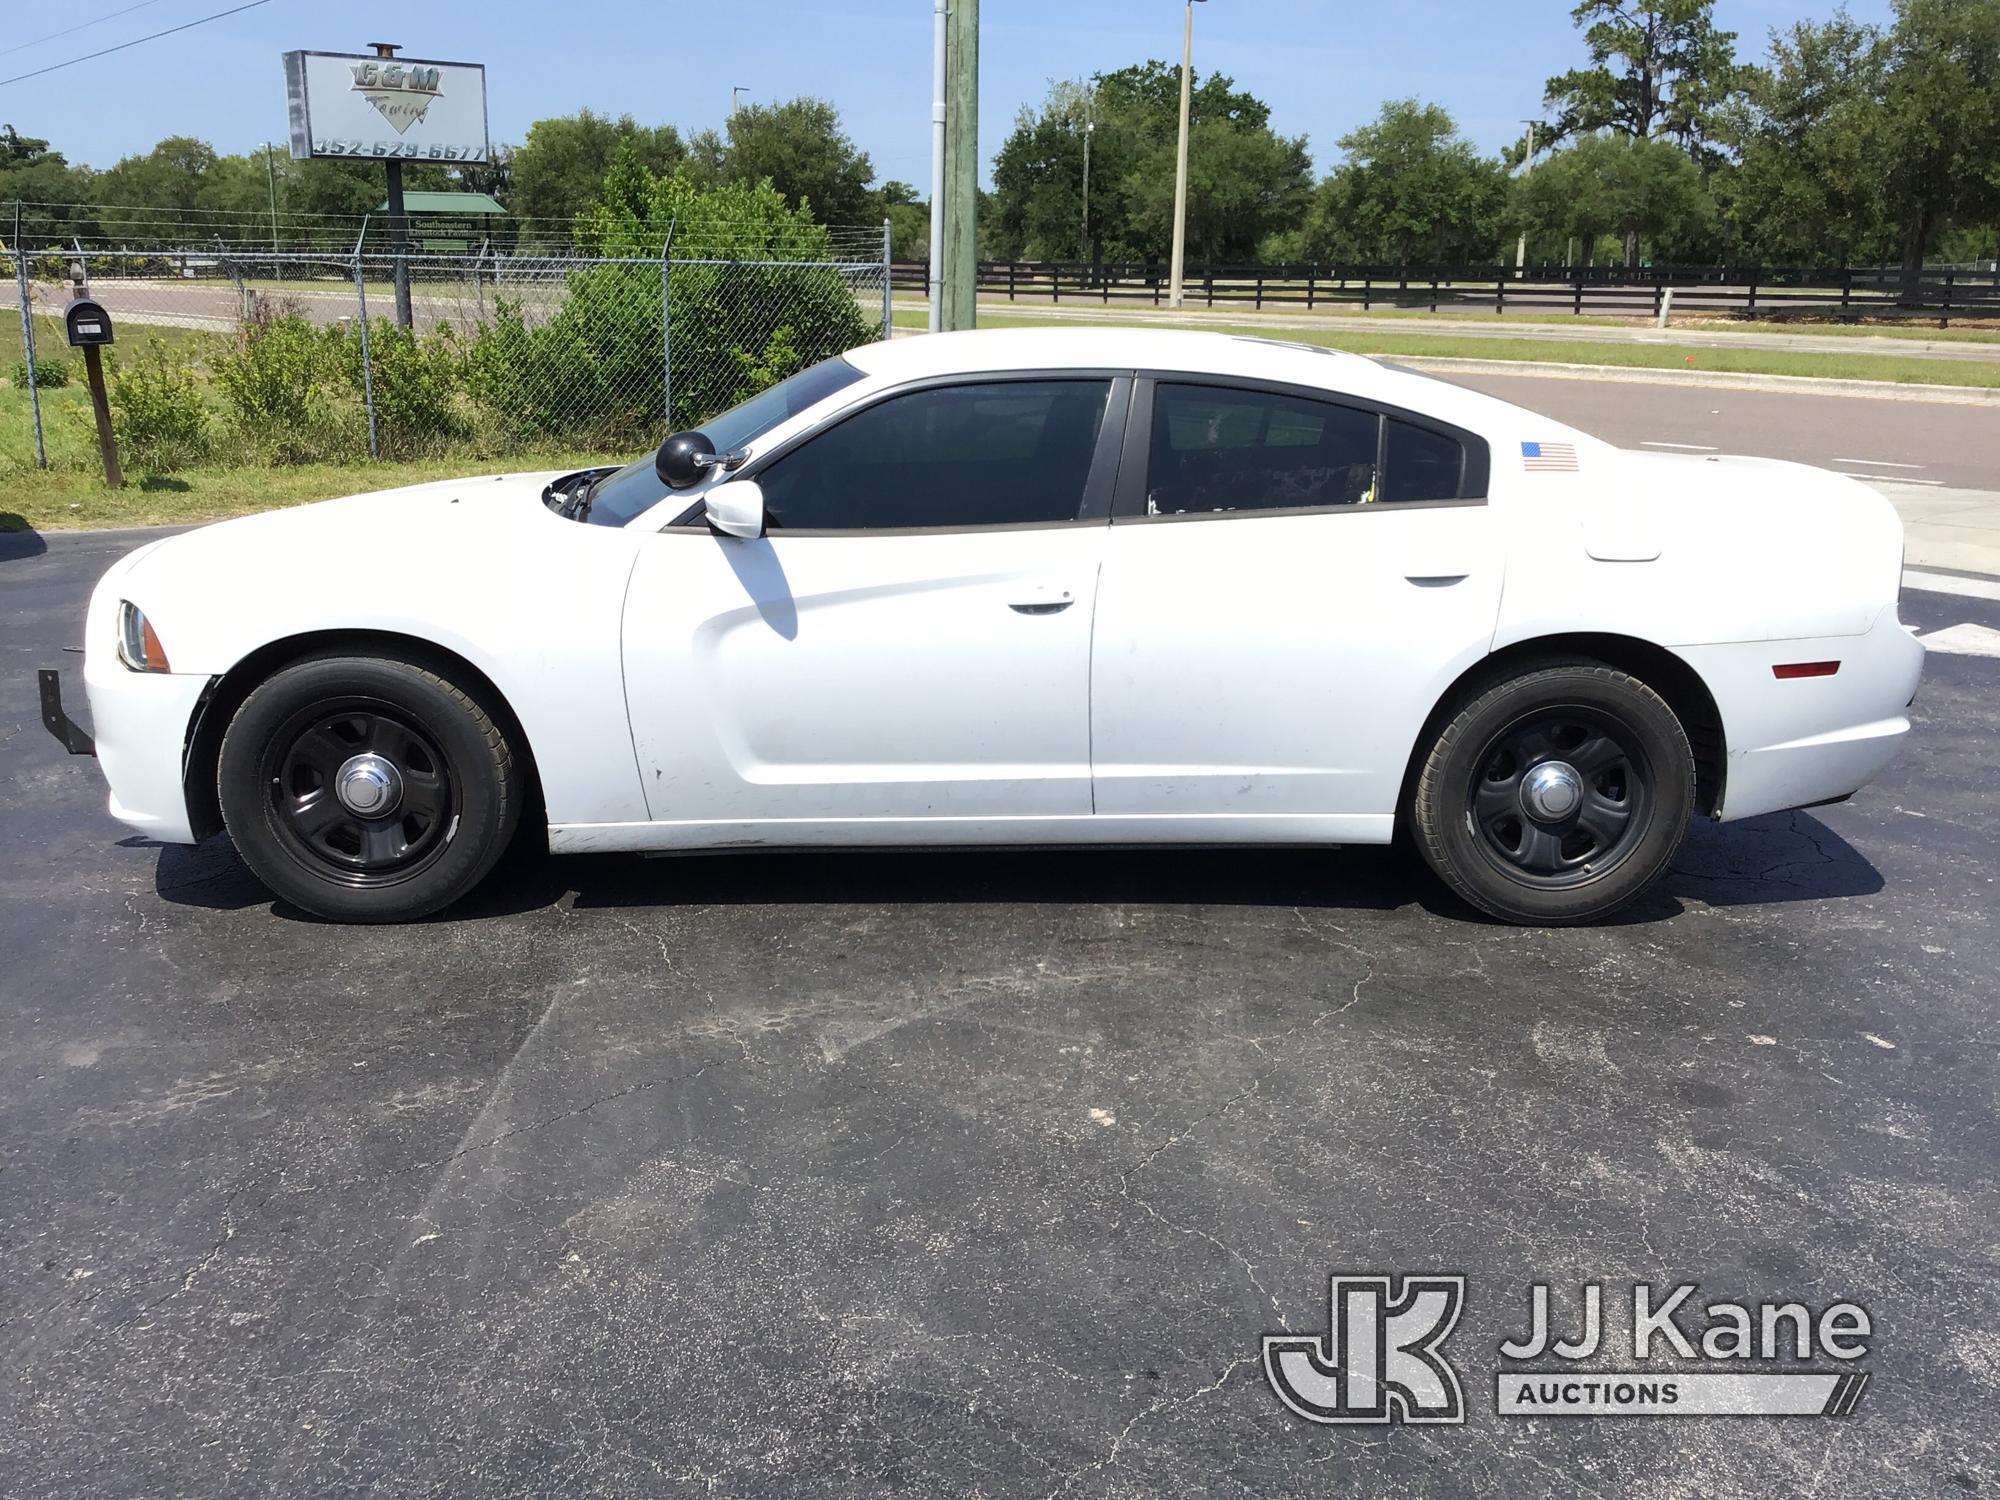 (Ocala, FL) 2014 Dodge Charger Police Package 4-Door Sedan, Municipal Owned Runs & Moves) (Jump To S